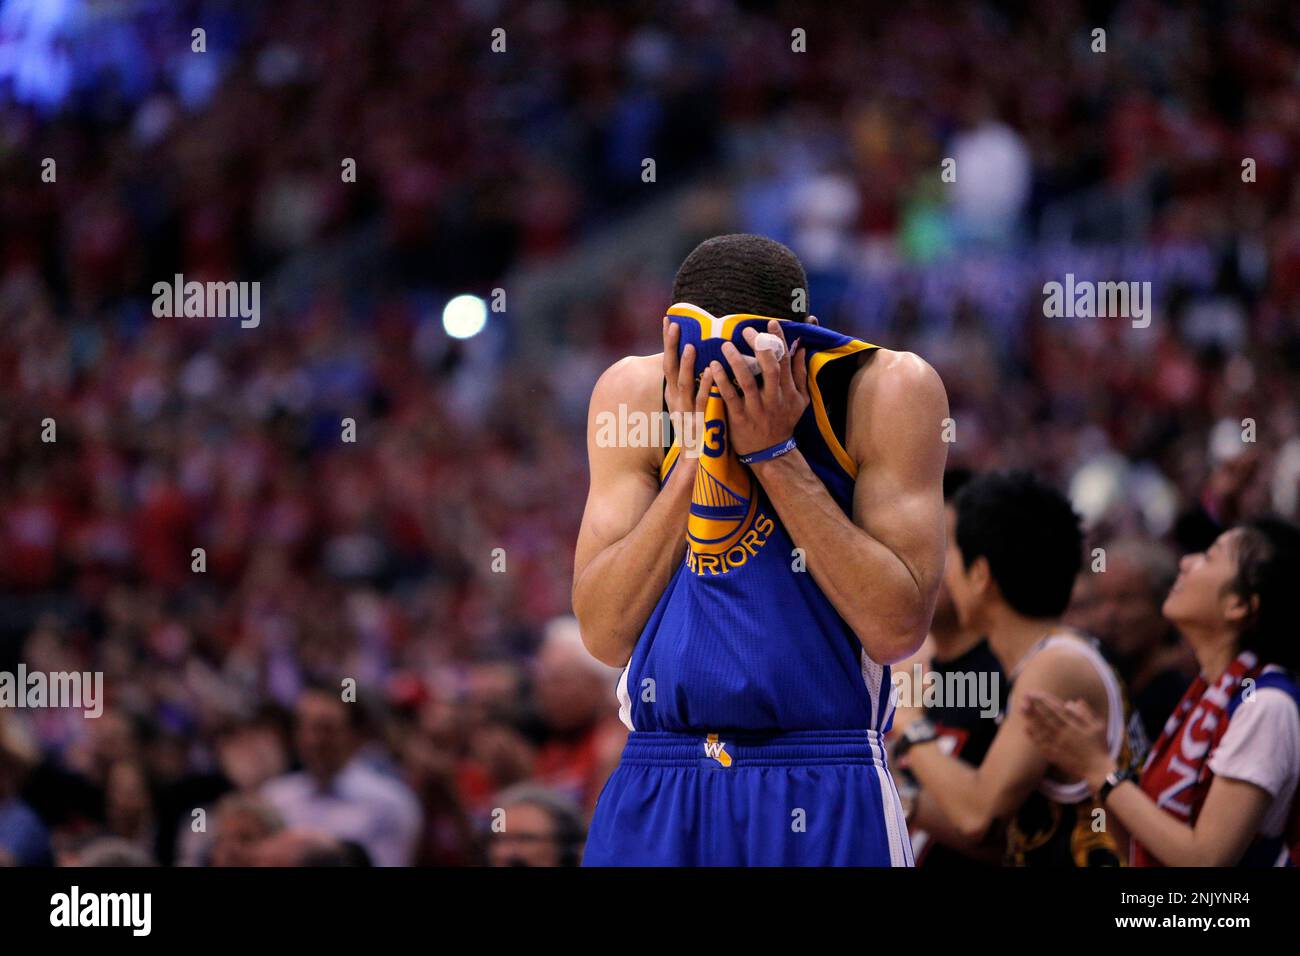 Stephen Curry (30) wipes his head with his jersey during a break in action  in the second hafl as the Clippers defeated the Warriors 126-121. The  Golden State Warriors played the Los